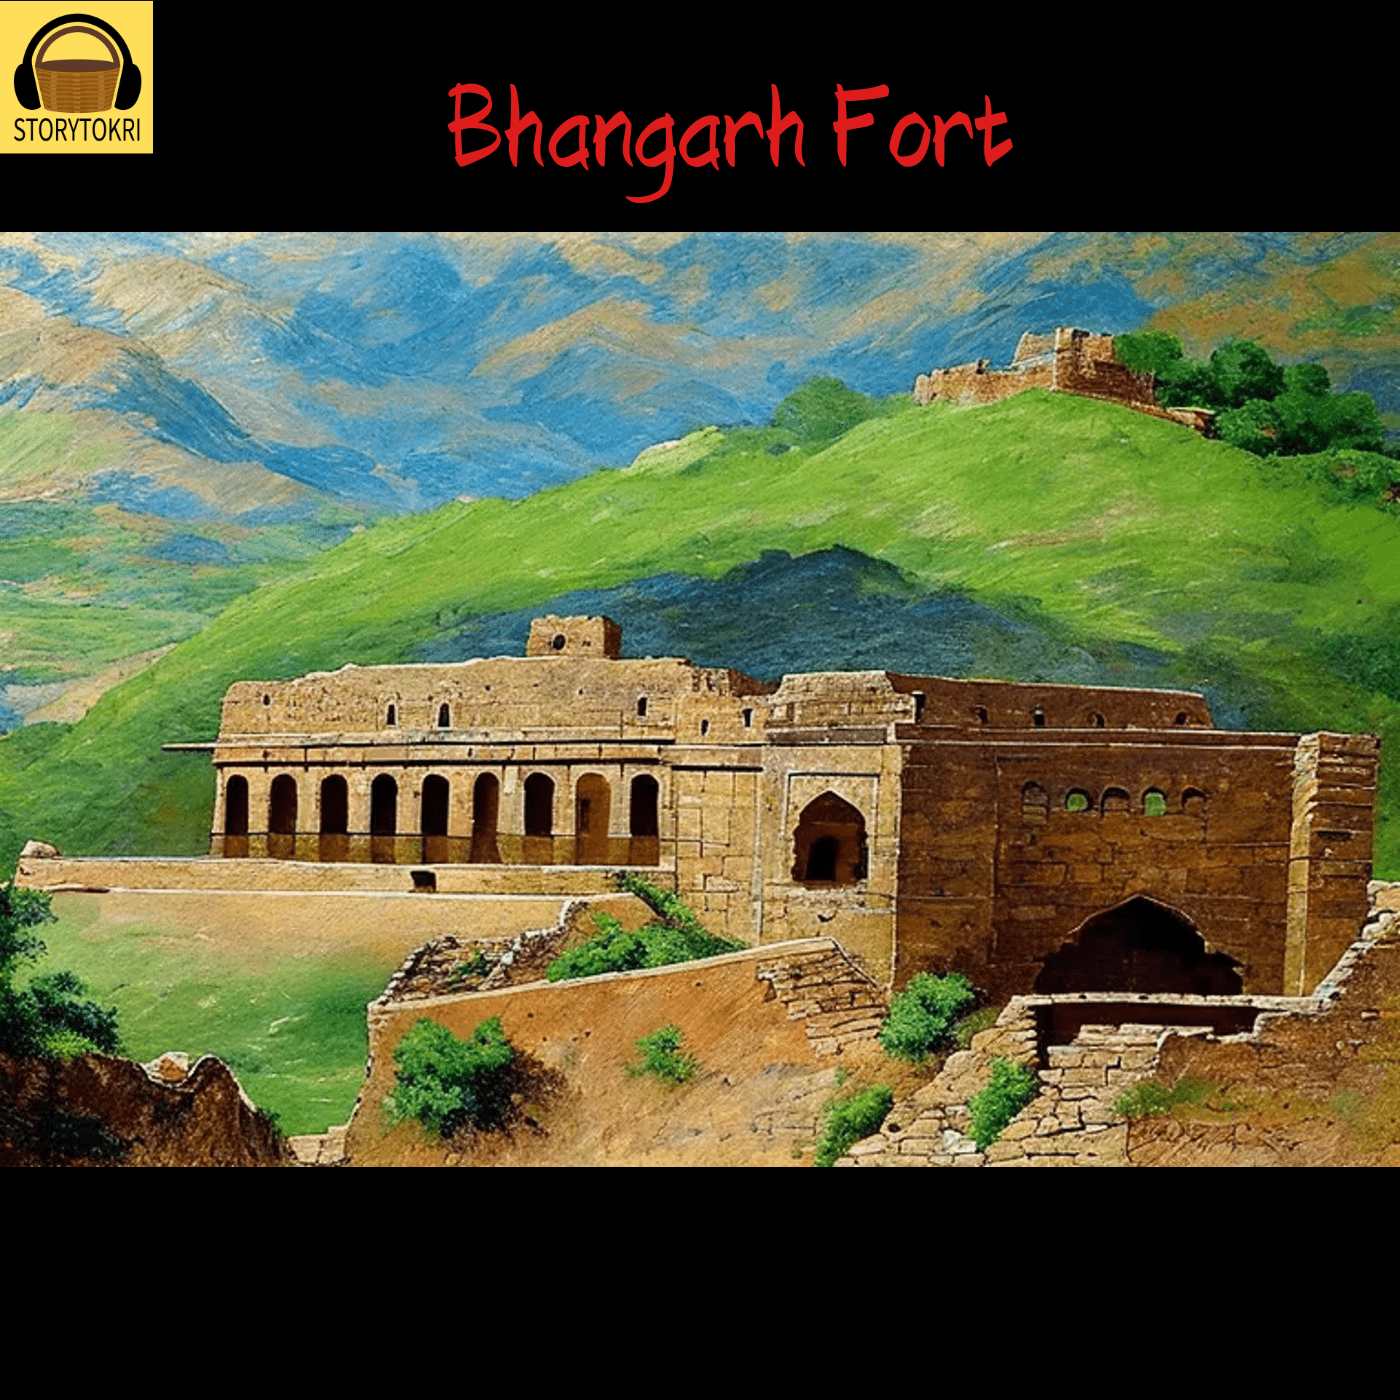 Bhangarh Fort (New Show Special Release)